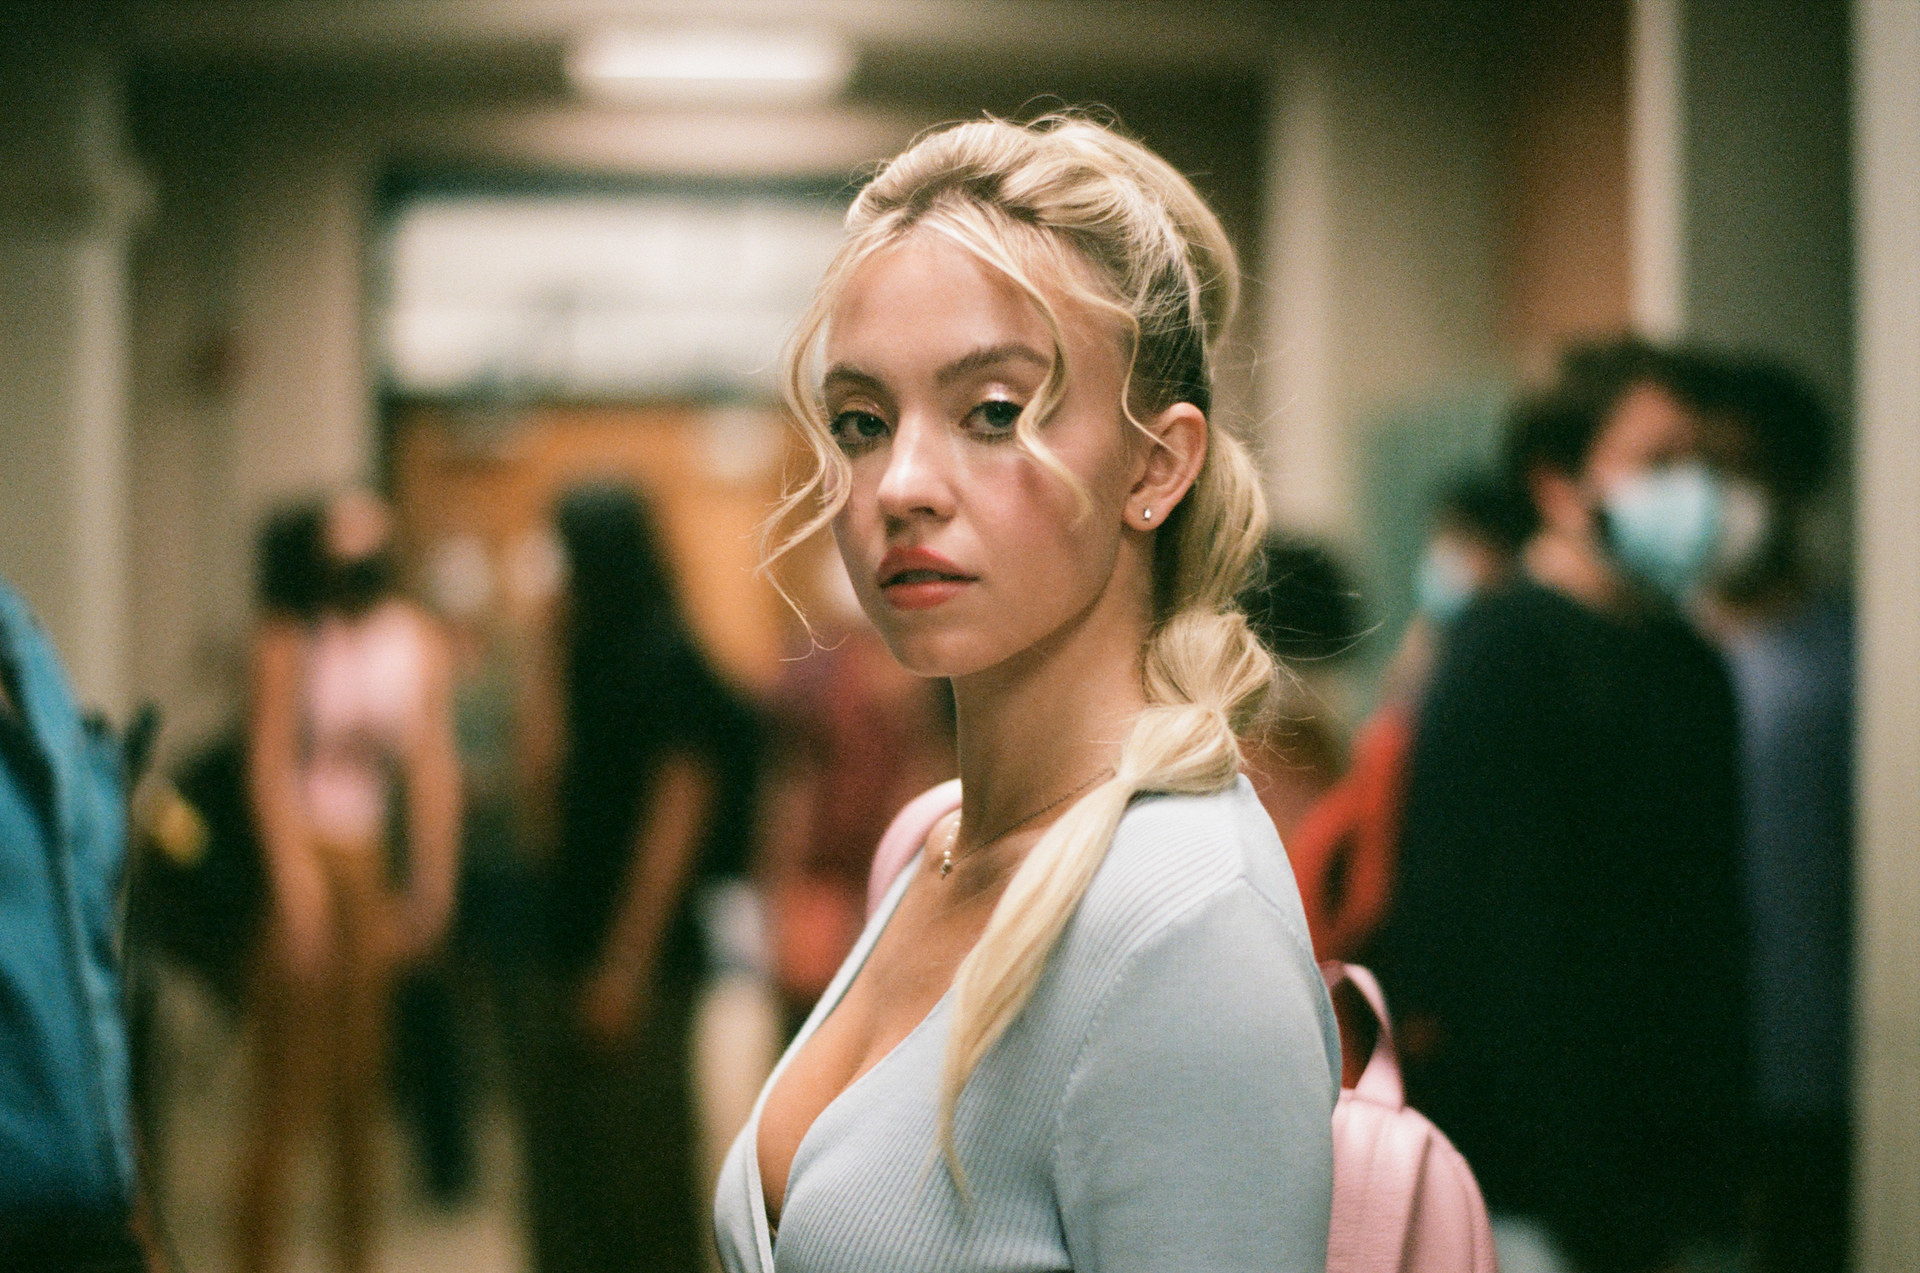 A blonde white teenage girl stands in a crowned high school hallway